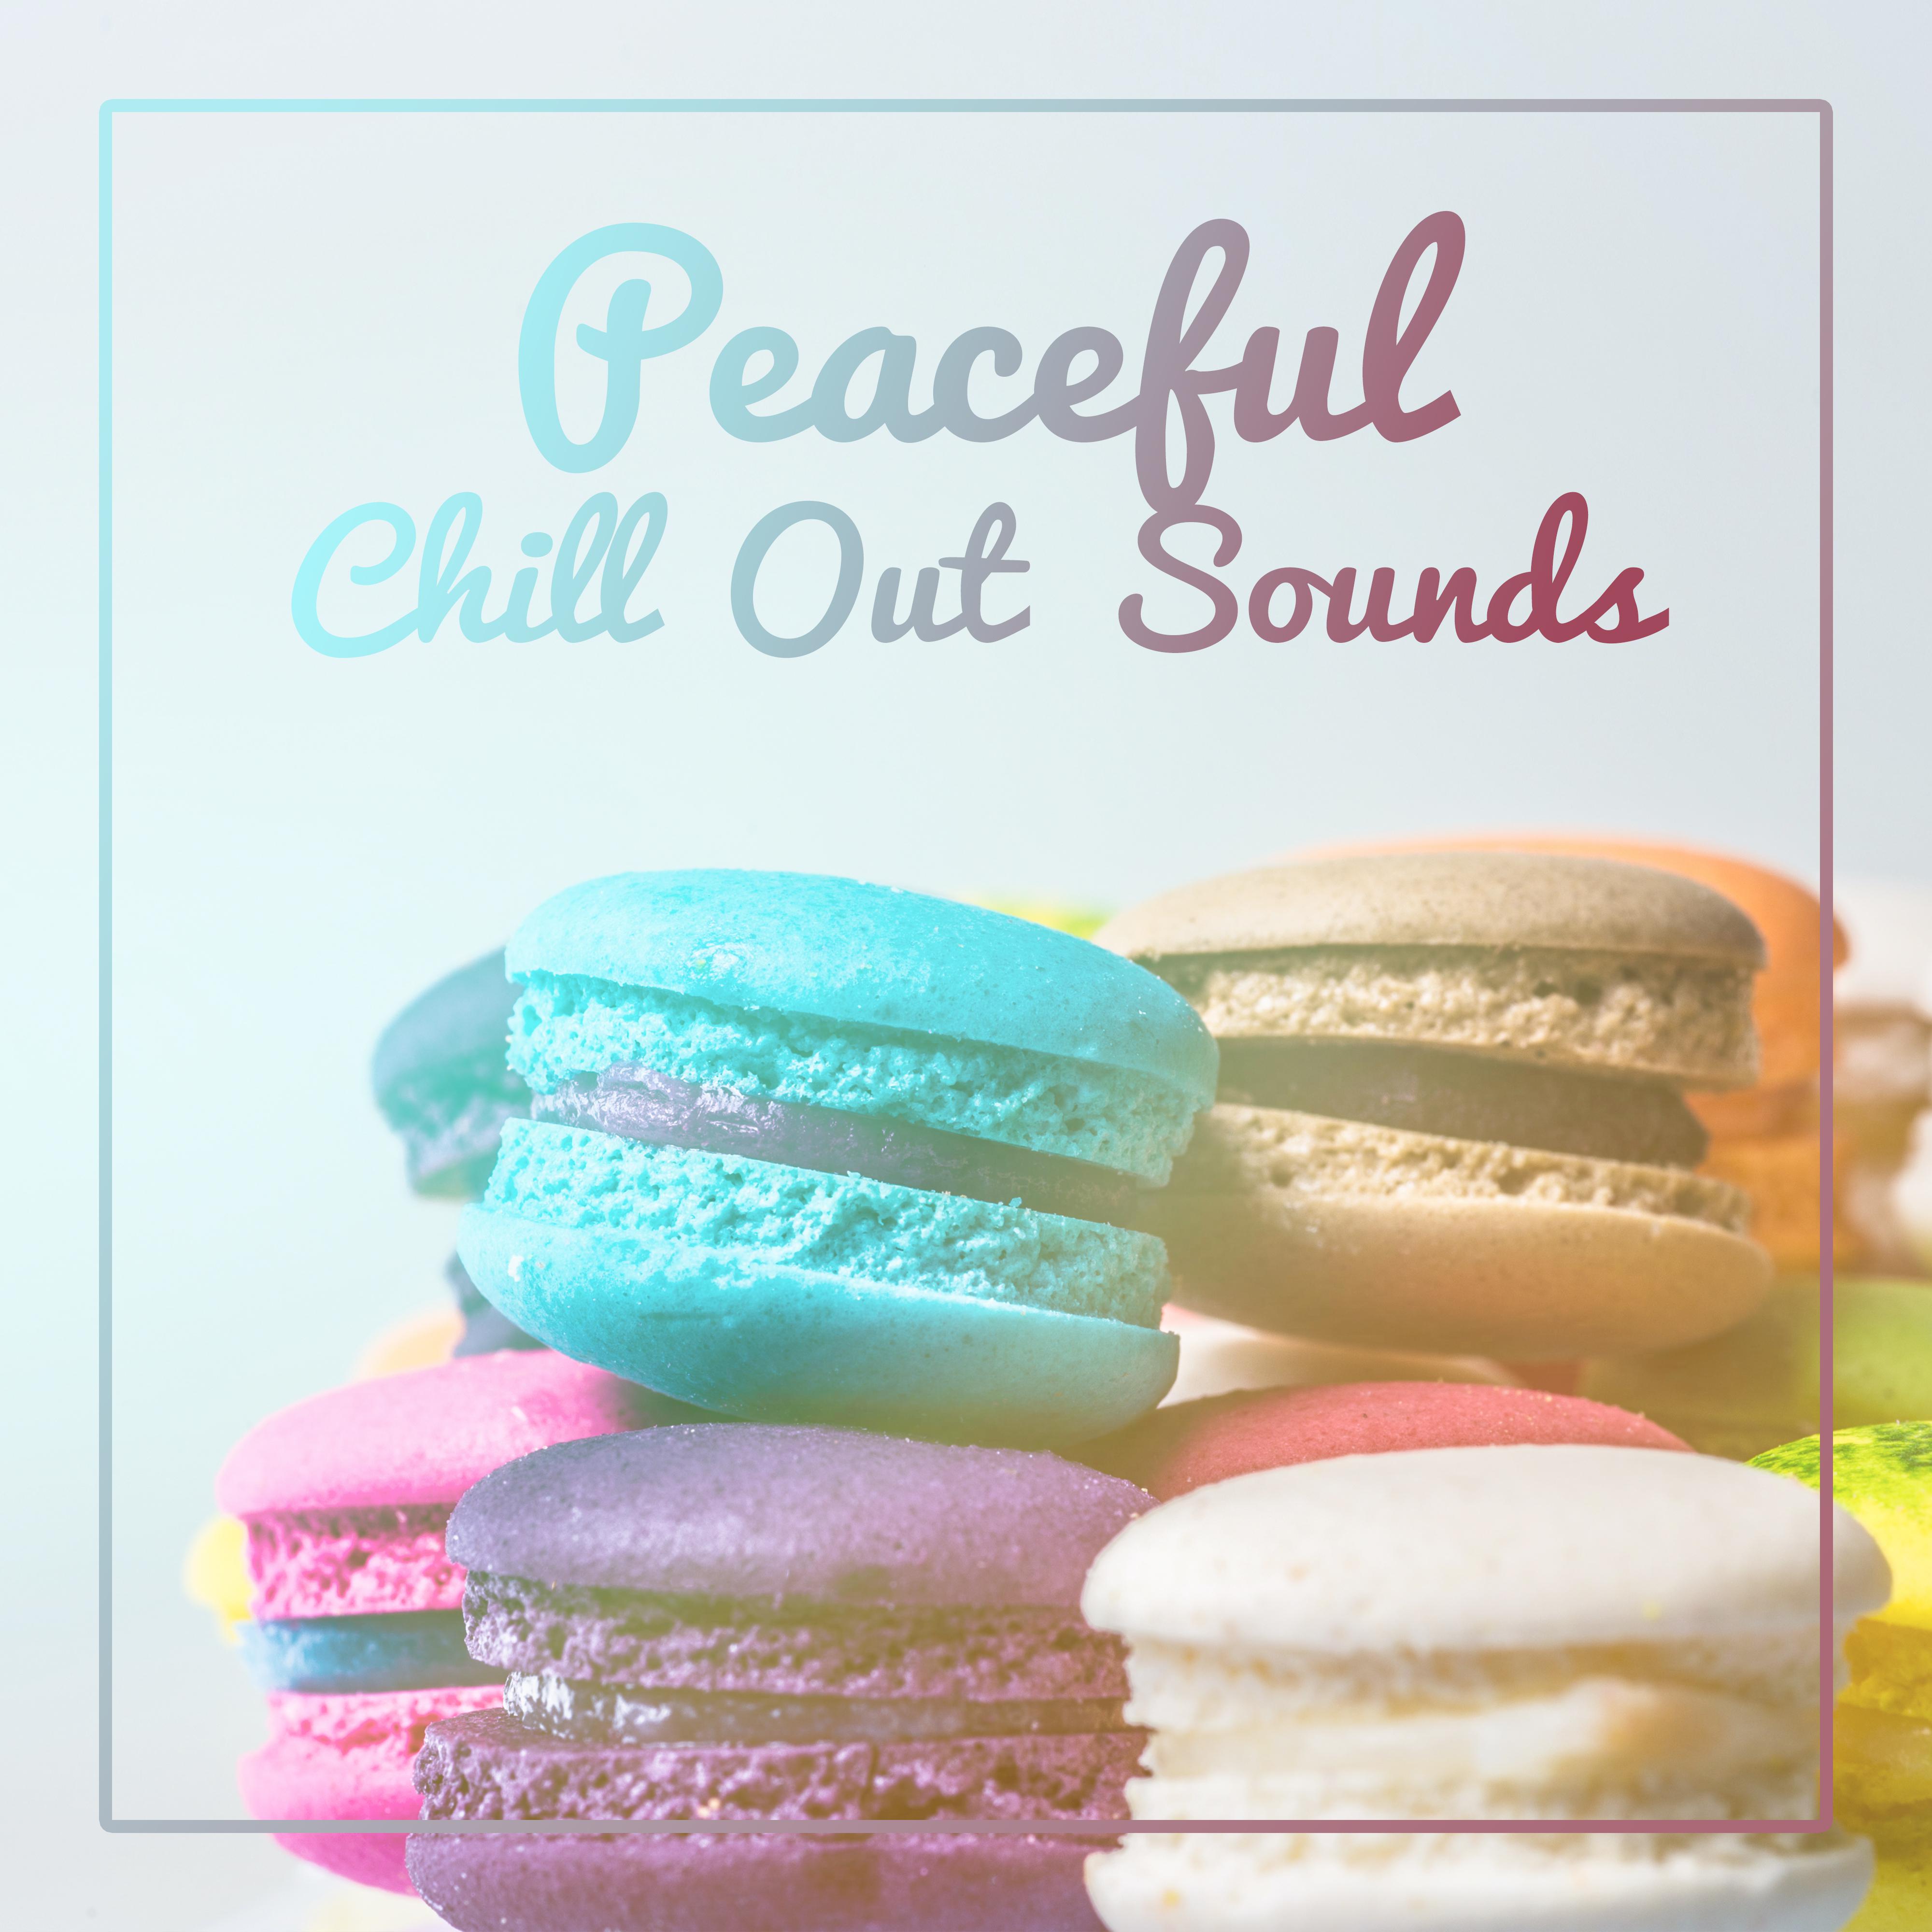 Peaceful Chill Out Sounds  Calm Waves to Relax, Chill Out 2017, Beats to Rest, Healing Therapy, Inner Peace